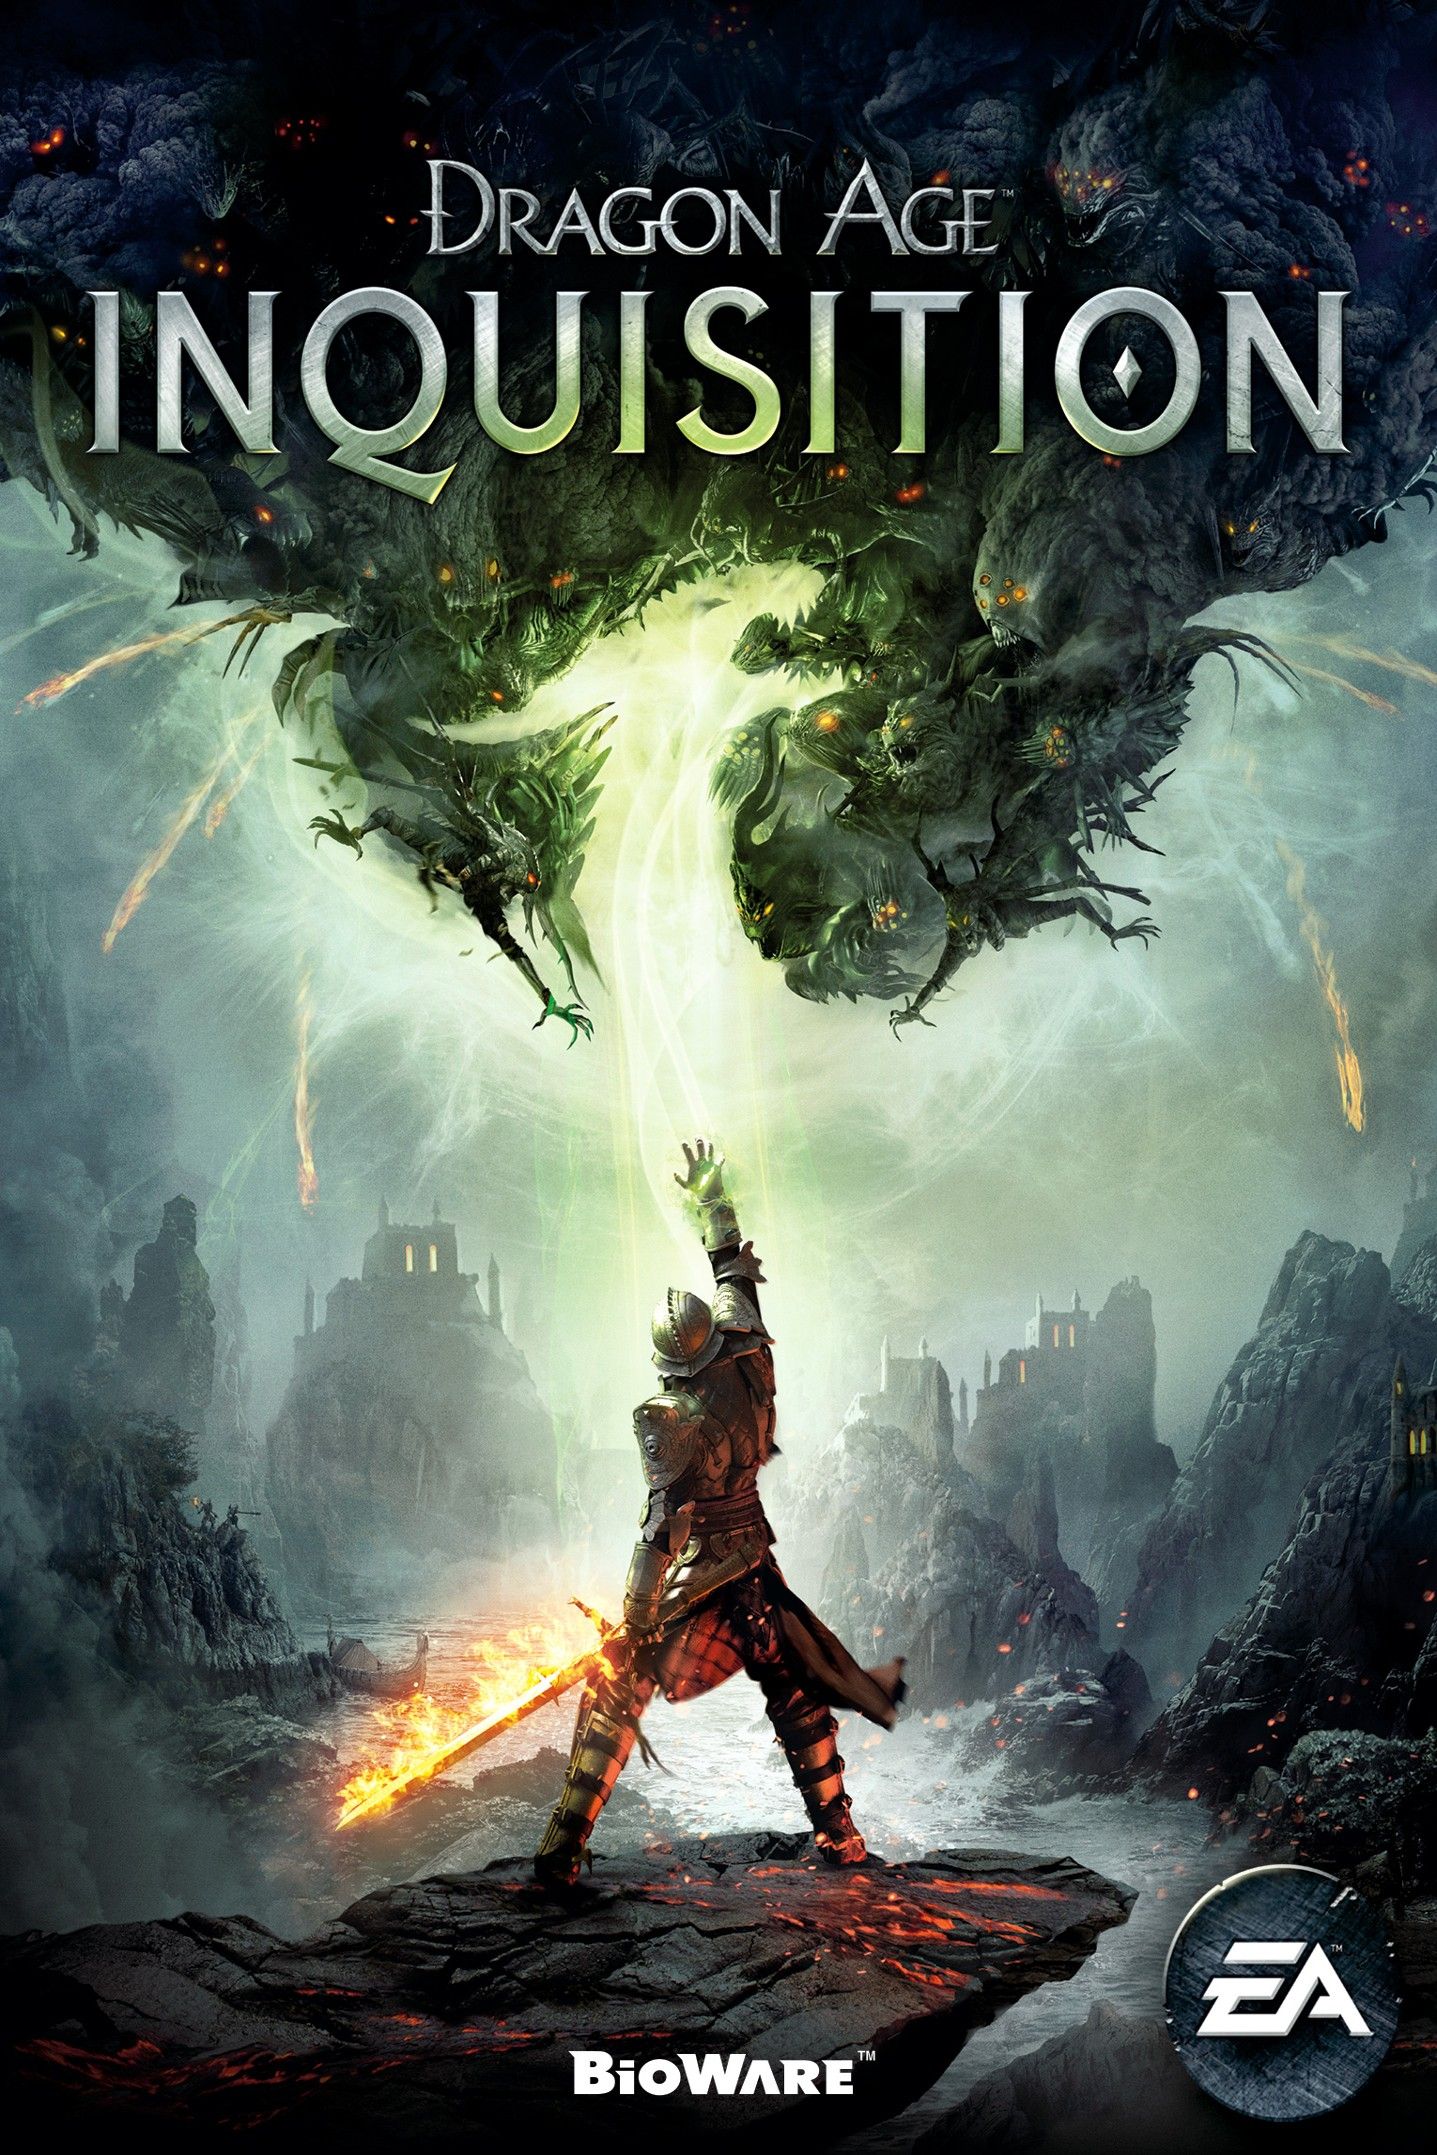 Dragon age inquisition poster